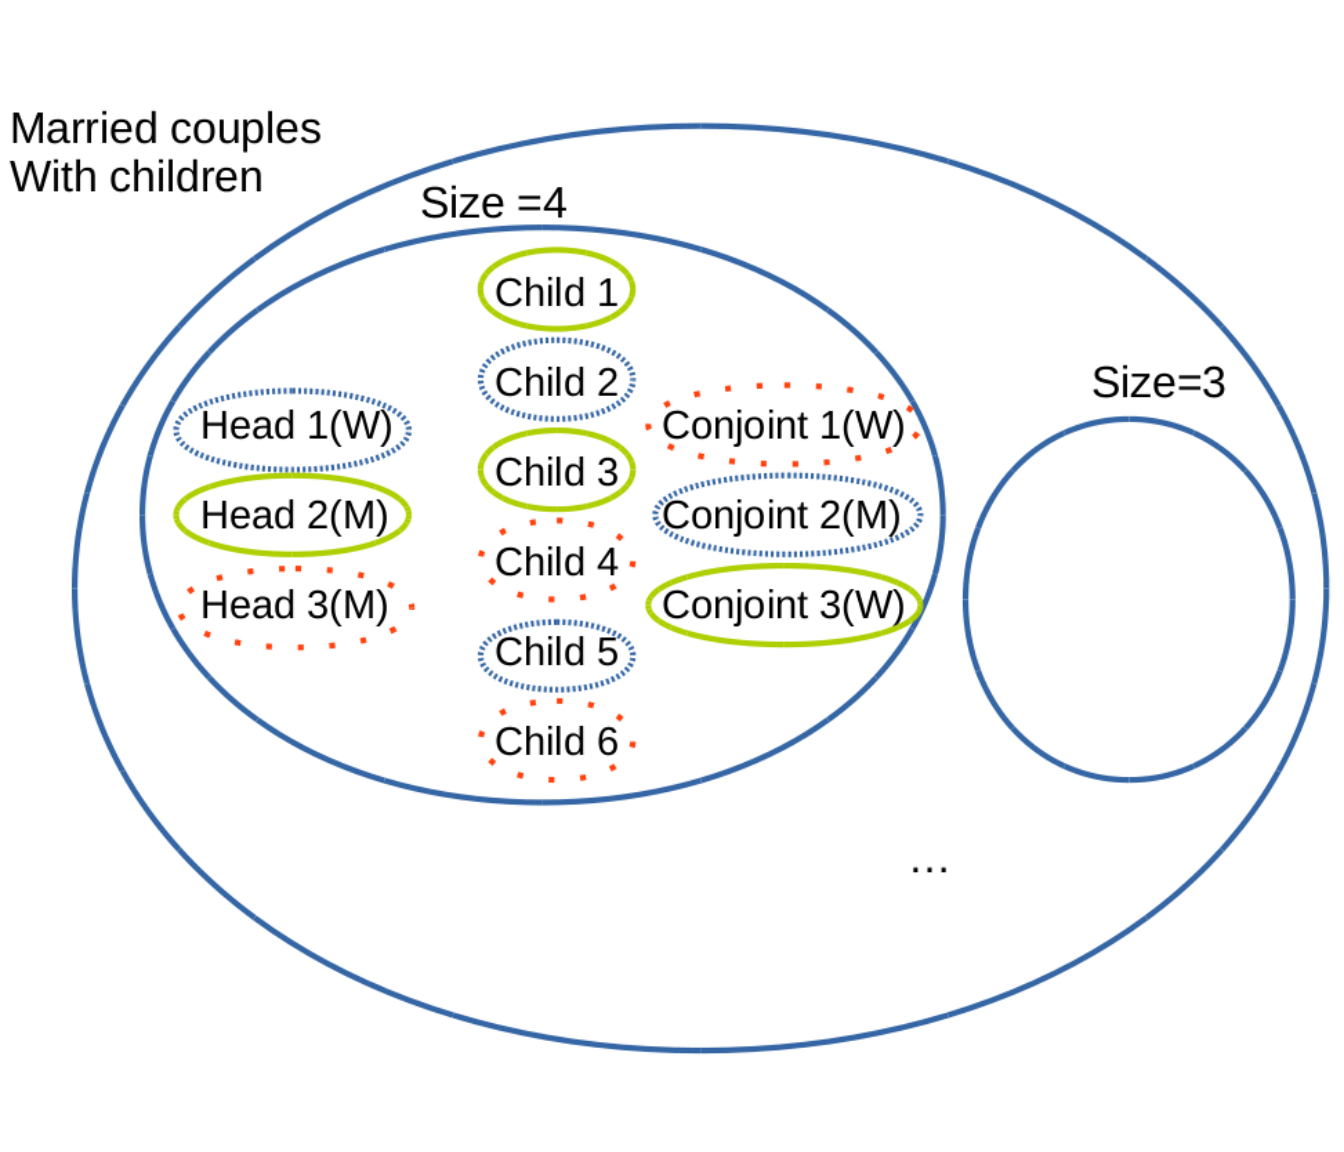 Illustration of the problem of grouping members of married couples with children.